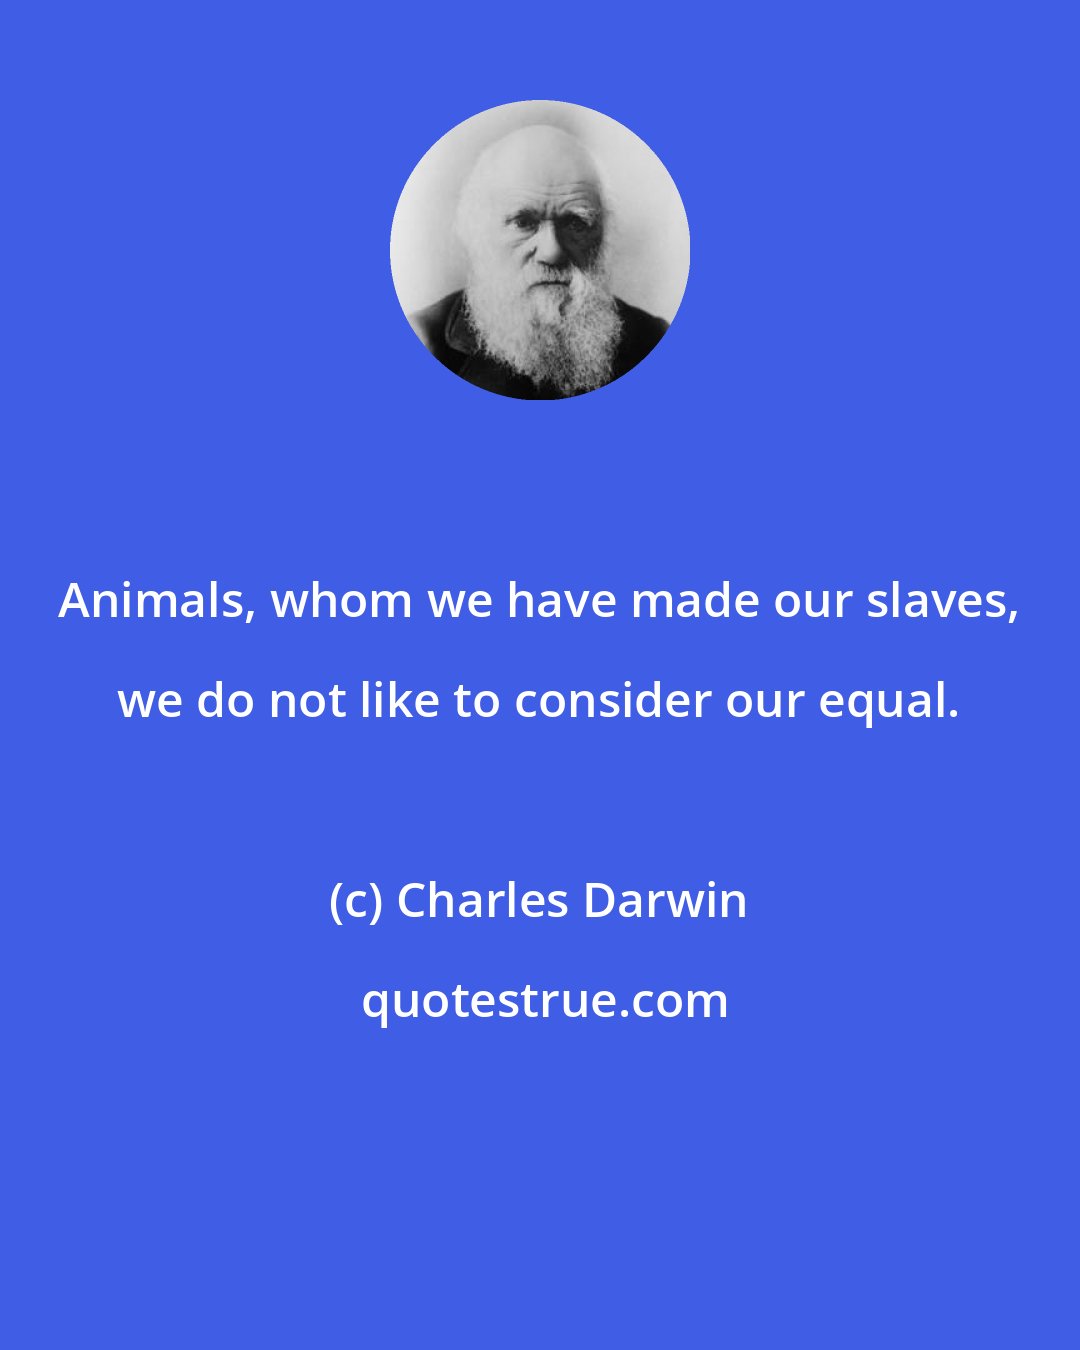 Charles Darwin: Animals, whom we have made our slaves, we do not like to consider our equal.